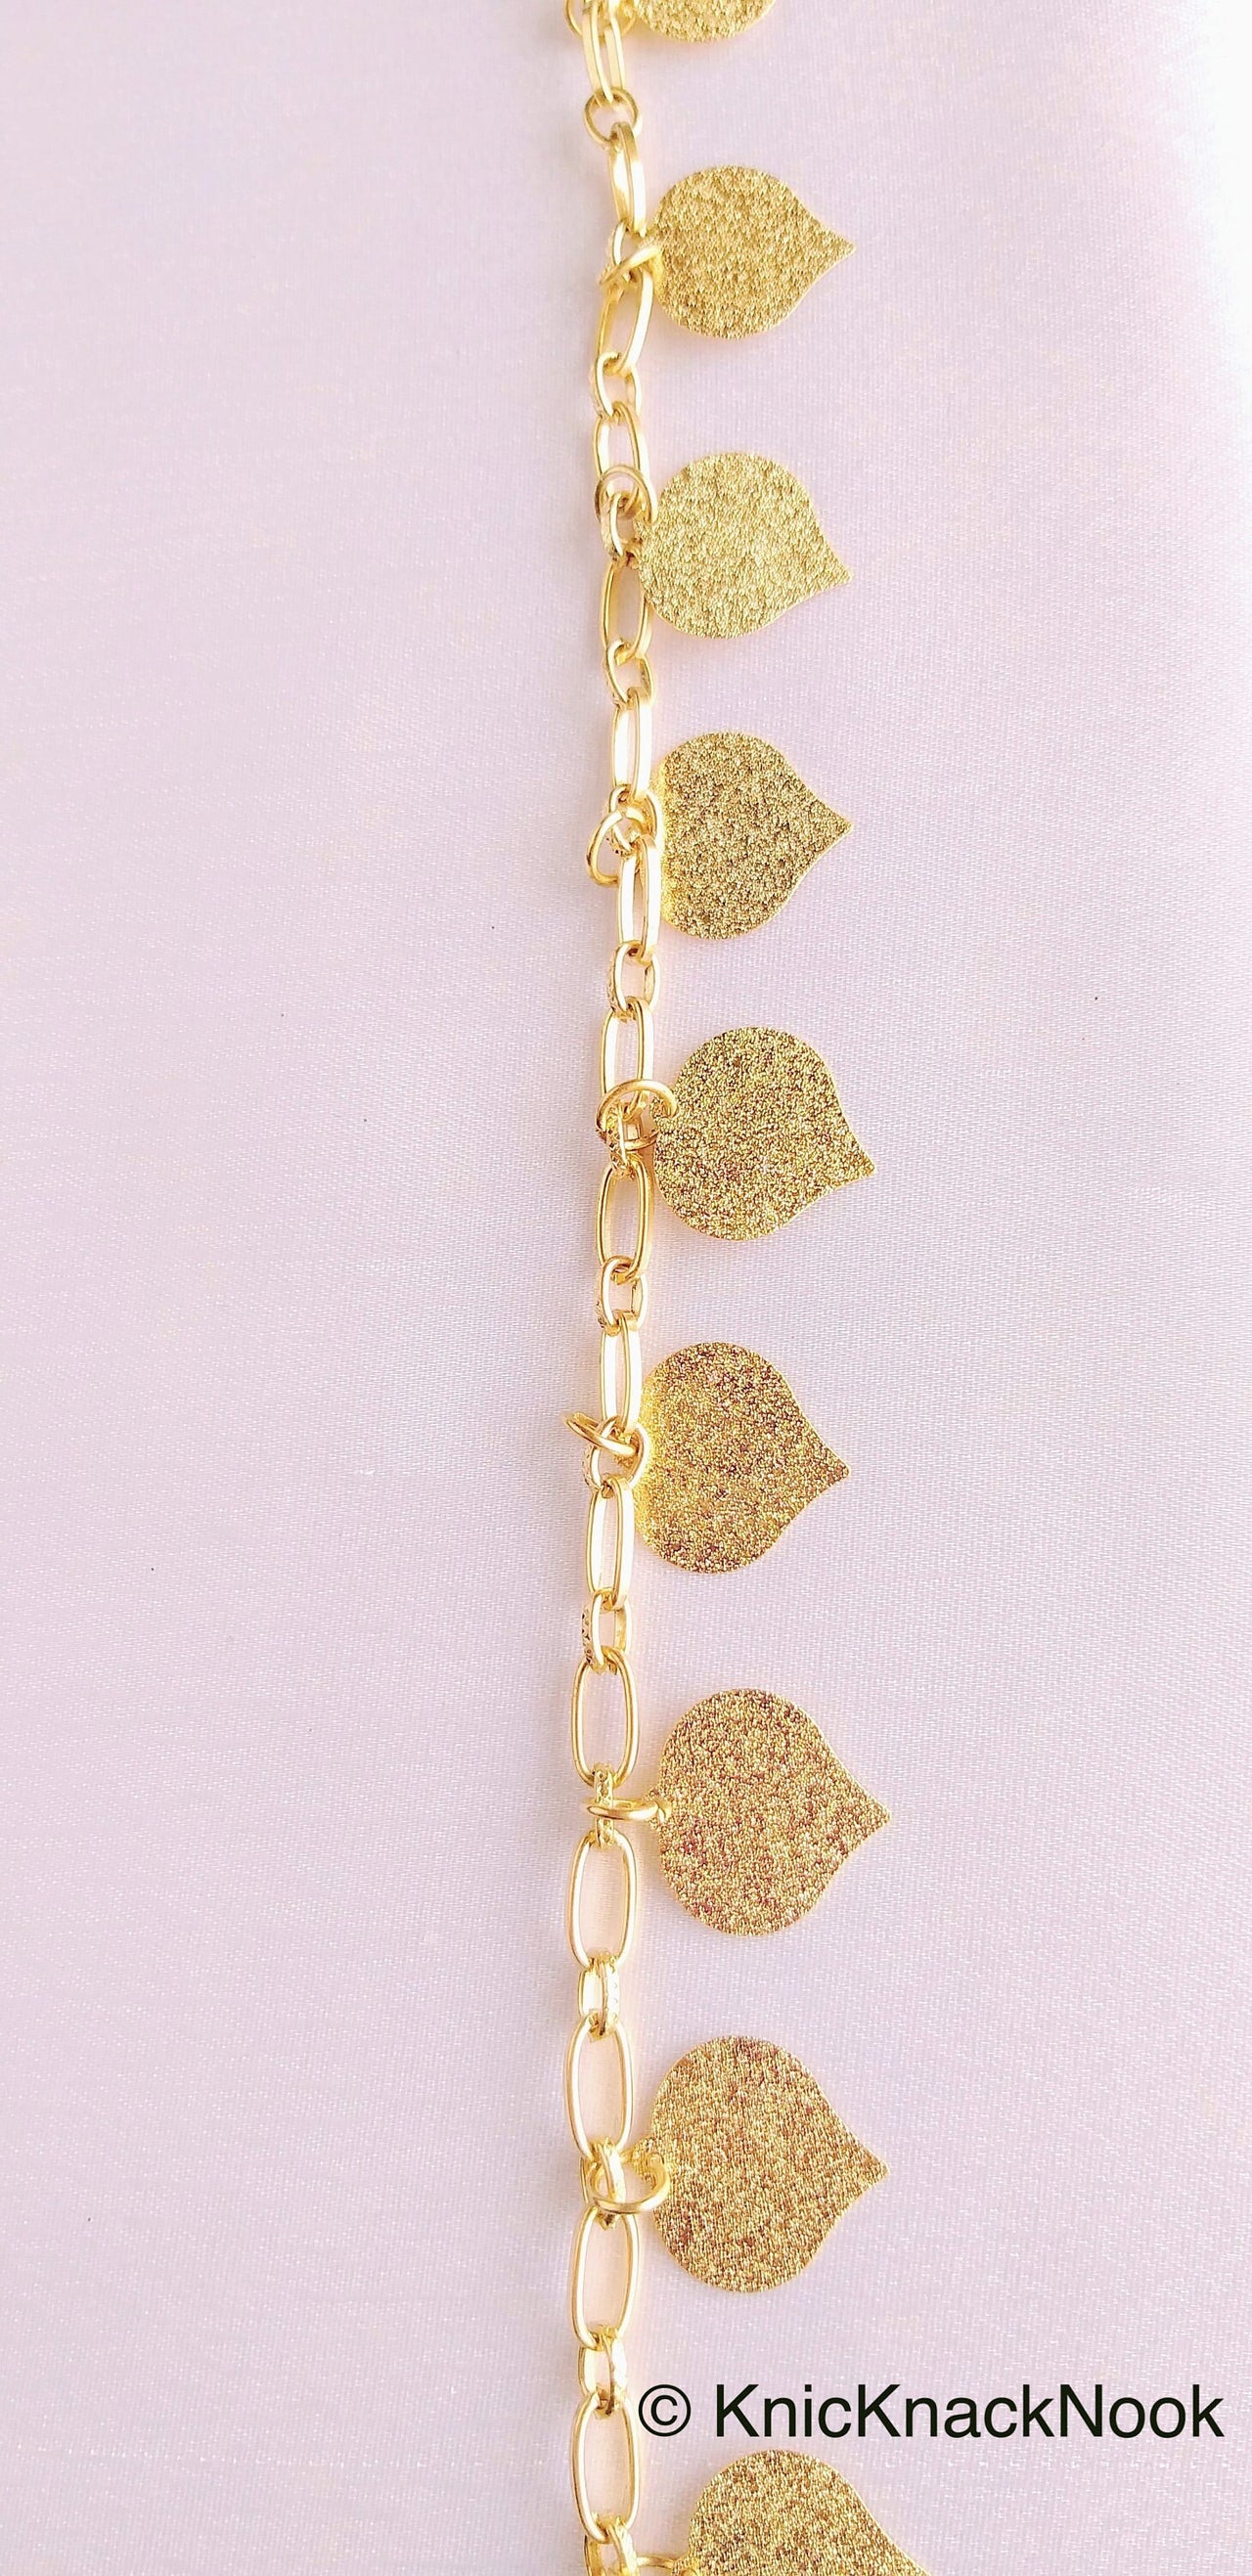 Gold Chain Metal Trim, Metallic Chain with Gold Shimmer Leaf Charms, Beaded Bohemian trim